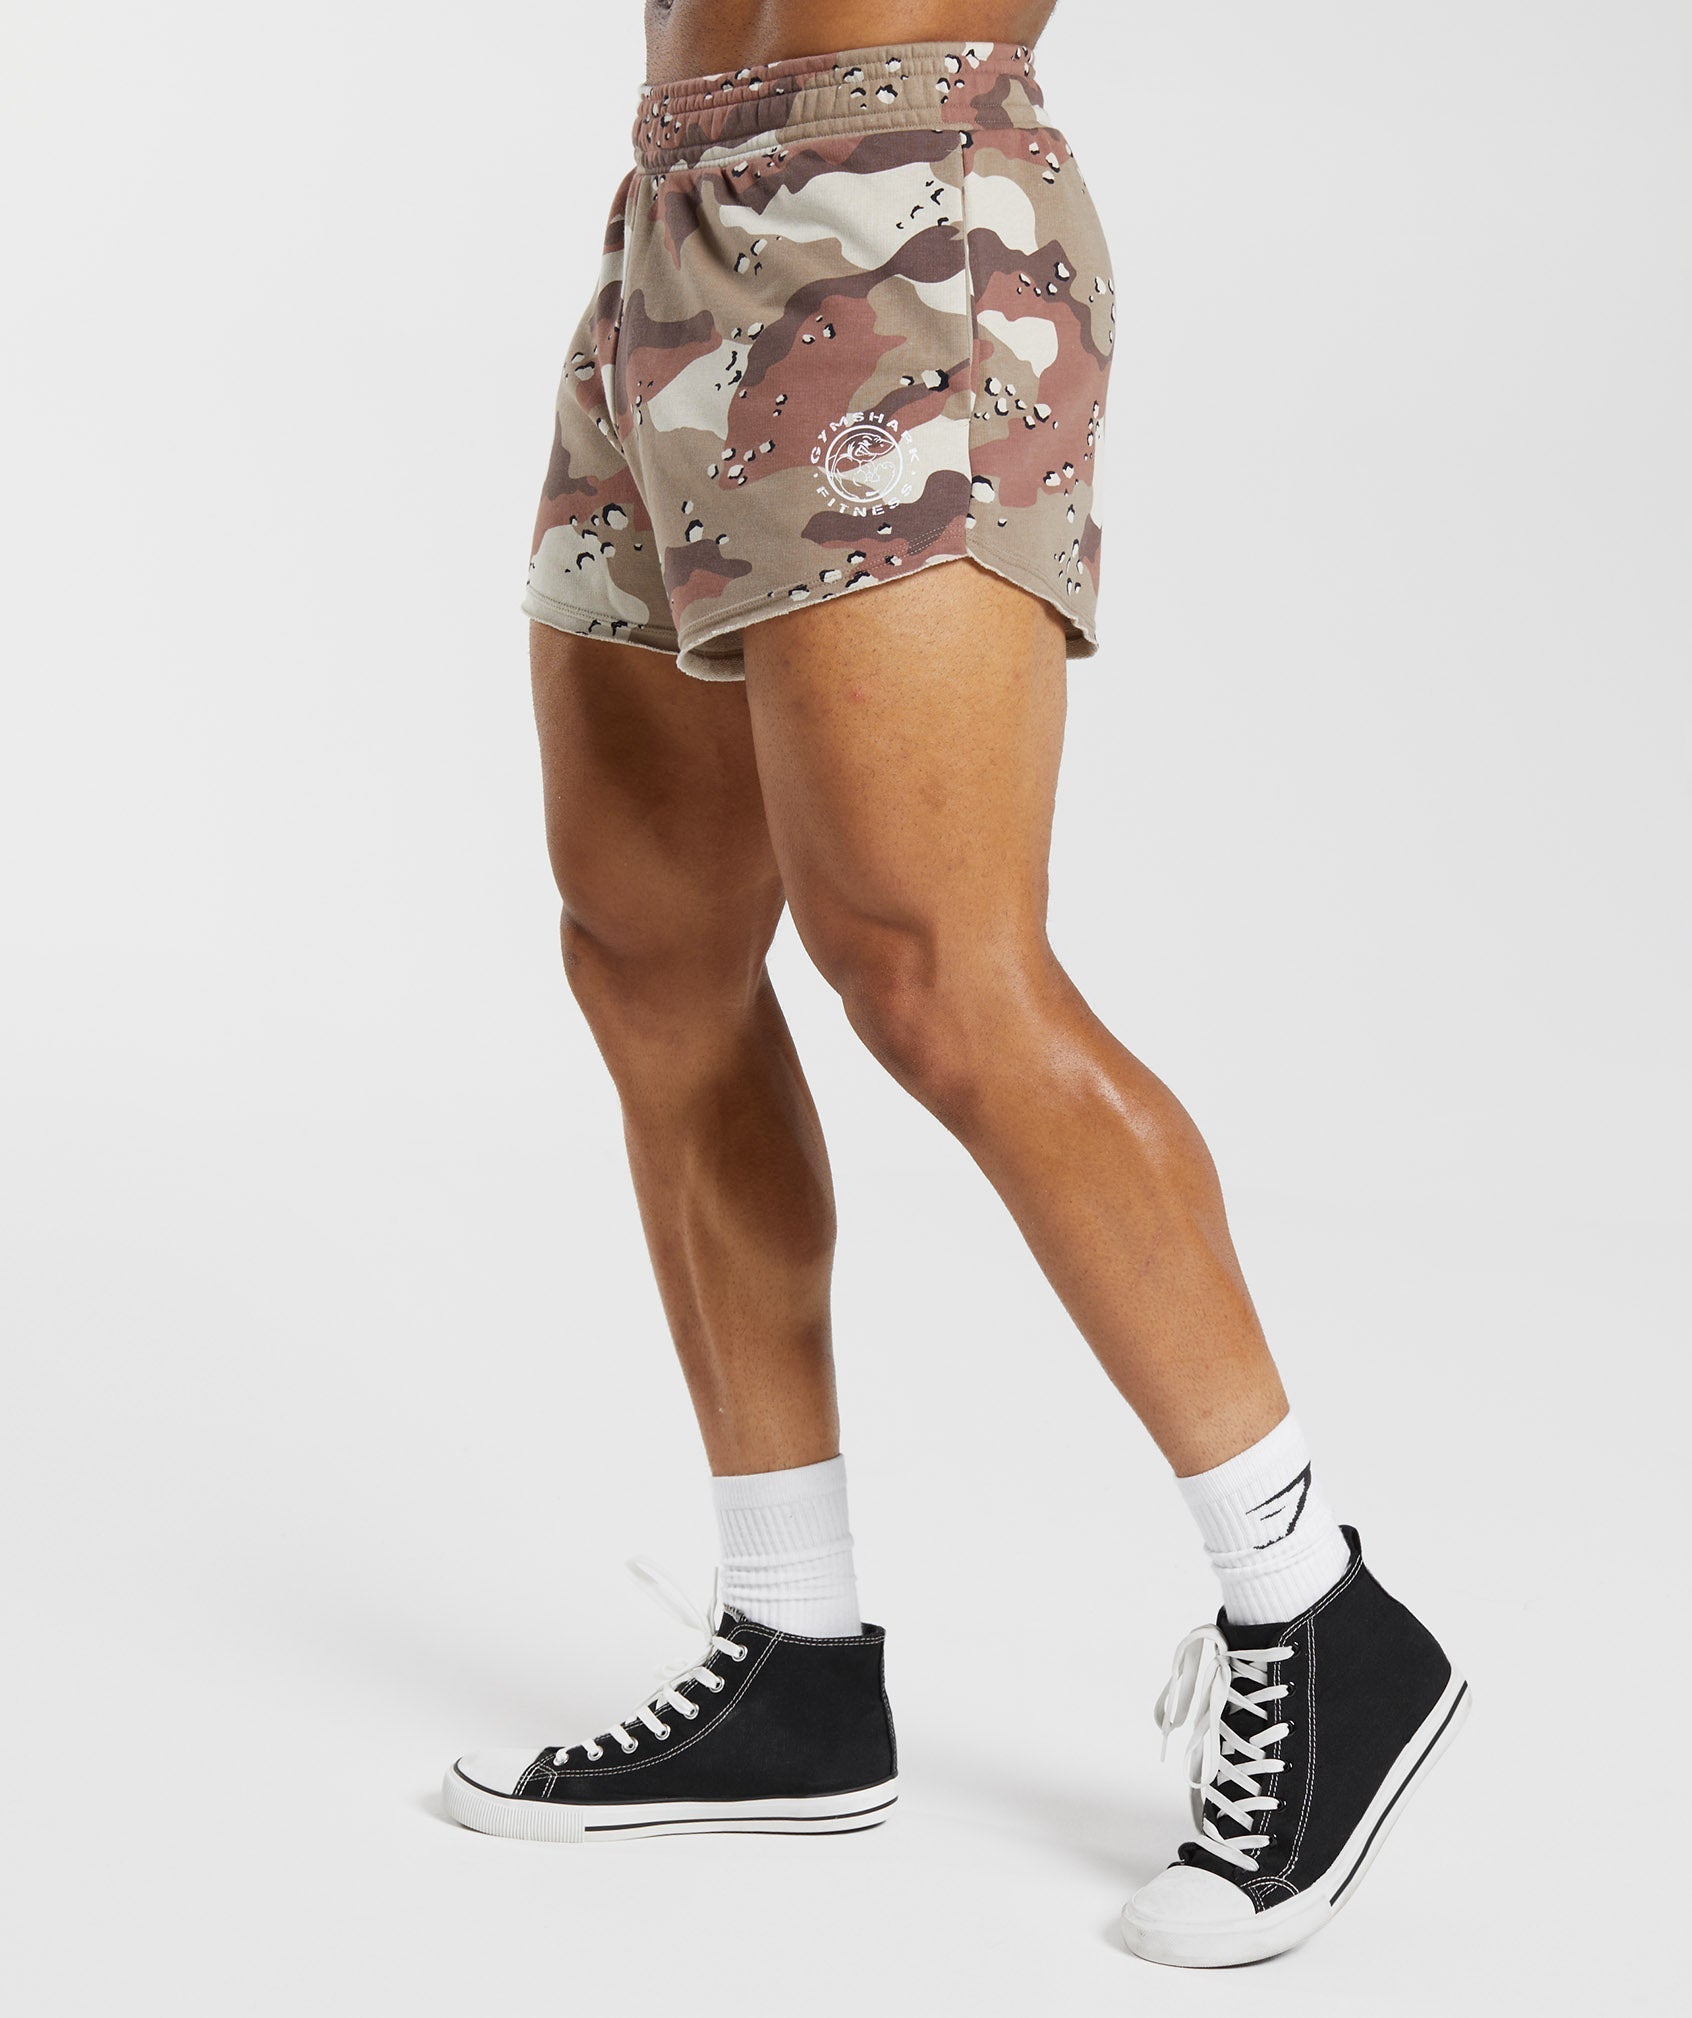 Legacy 4" Shorts in Cement Brown - view 3